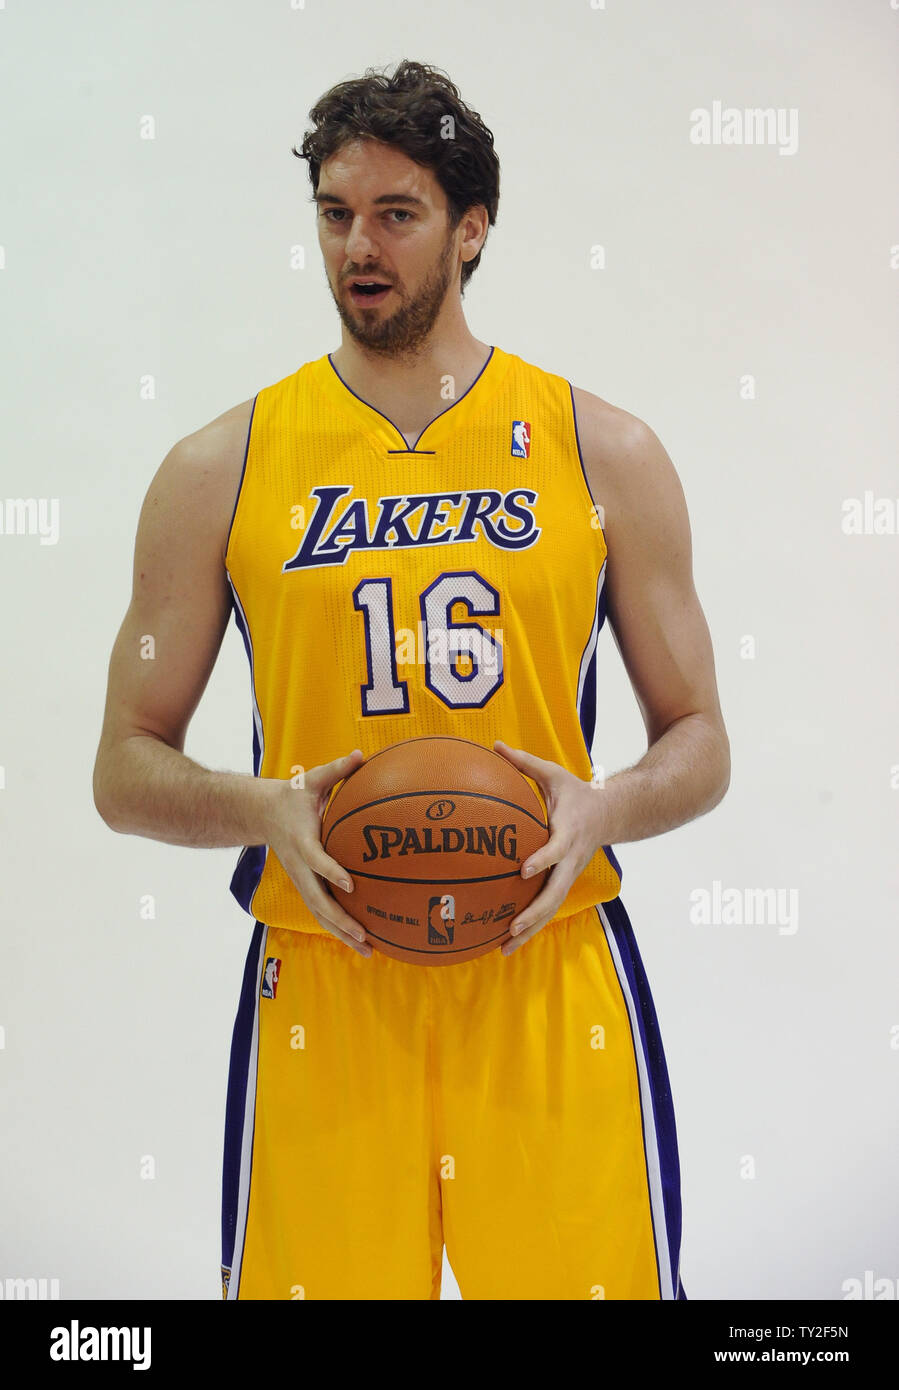 Los Angeles Lakers' Pau Gasol poses for photos during the basketball team's  media day at the Lakers training facility in El Segundo, California on  September 25, 2010. The Lakers will try to